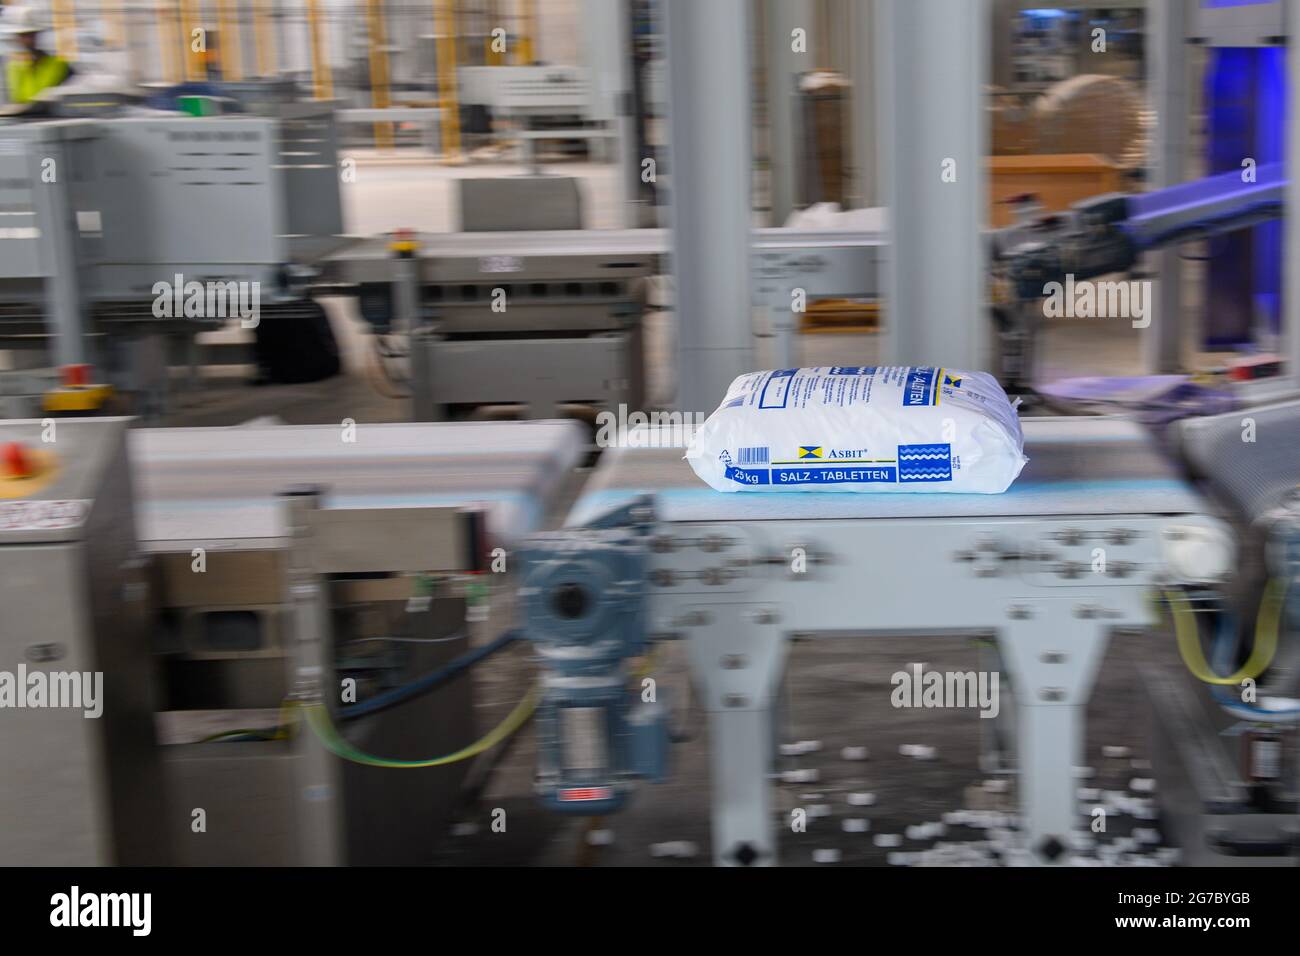 12 July 2021, Saxony-Anhalt, Staßfurt: A salt tablet produced and packaged  at the new plant of the chemical company Ciech lies on a conveyor belt.  Ciech is one of the leading producers